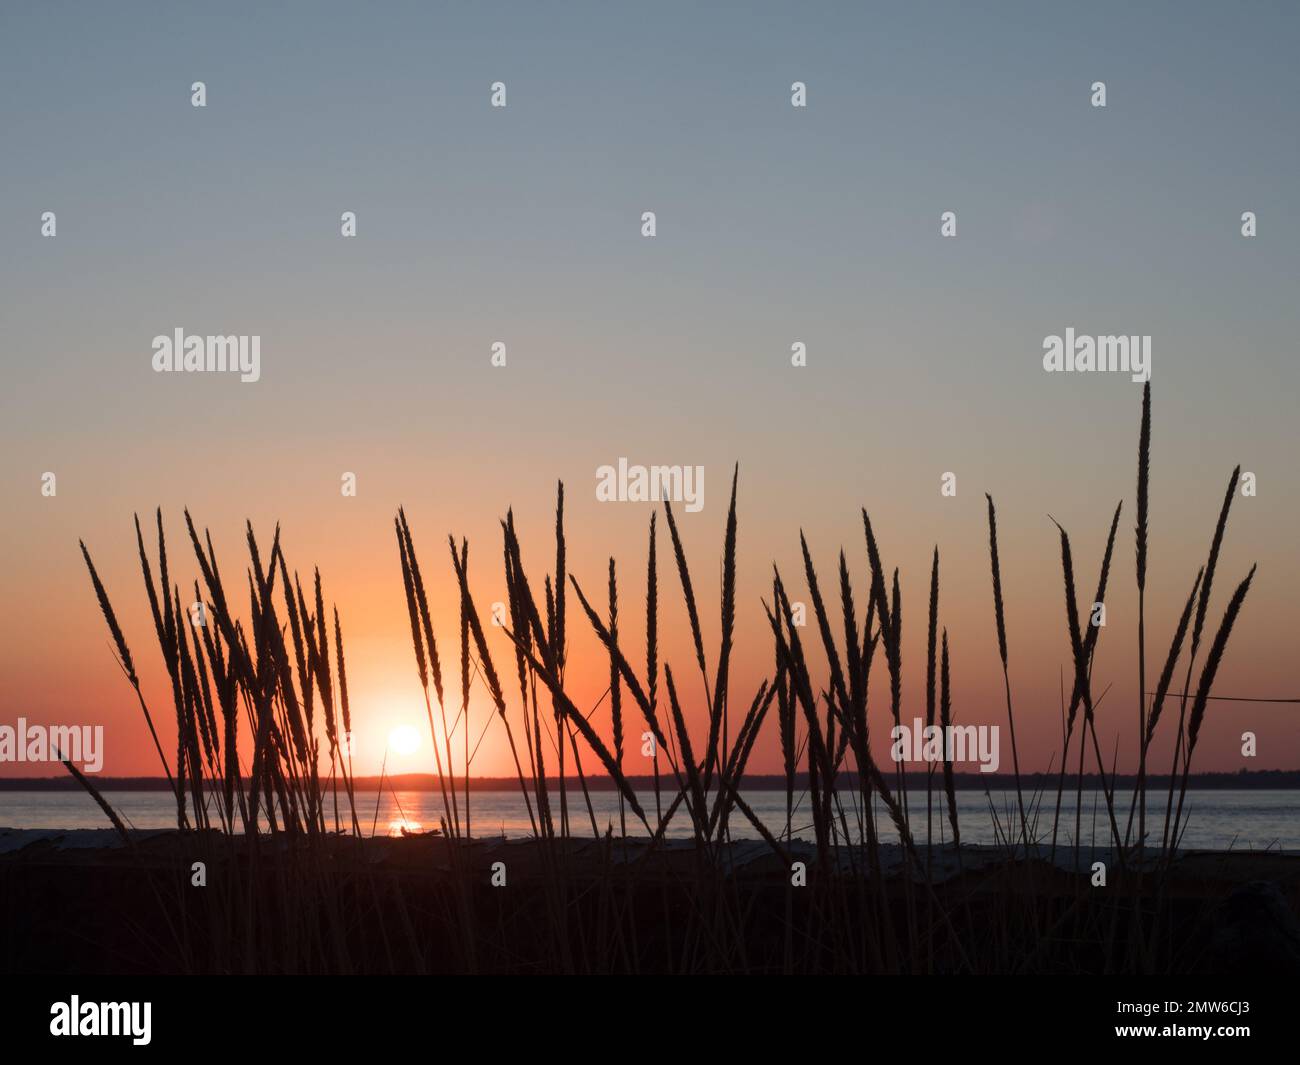 Reed reeds grass silhouette foreground backlit countre jour by low sunset over Solent sea water mainland outline background Stock Photo